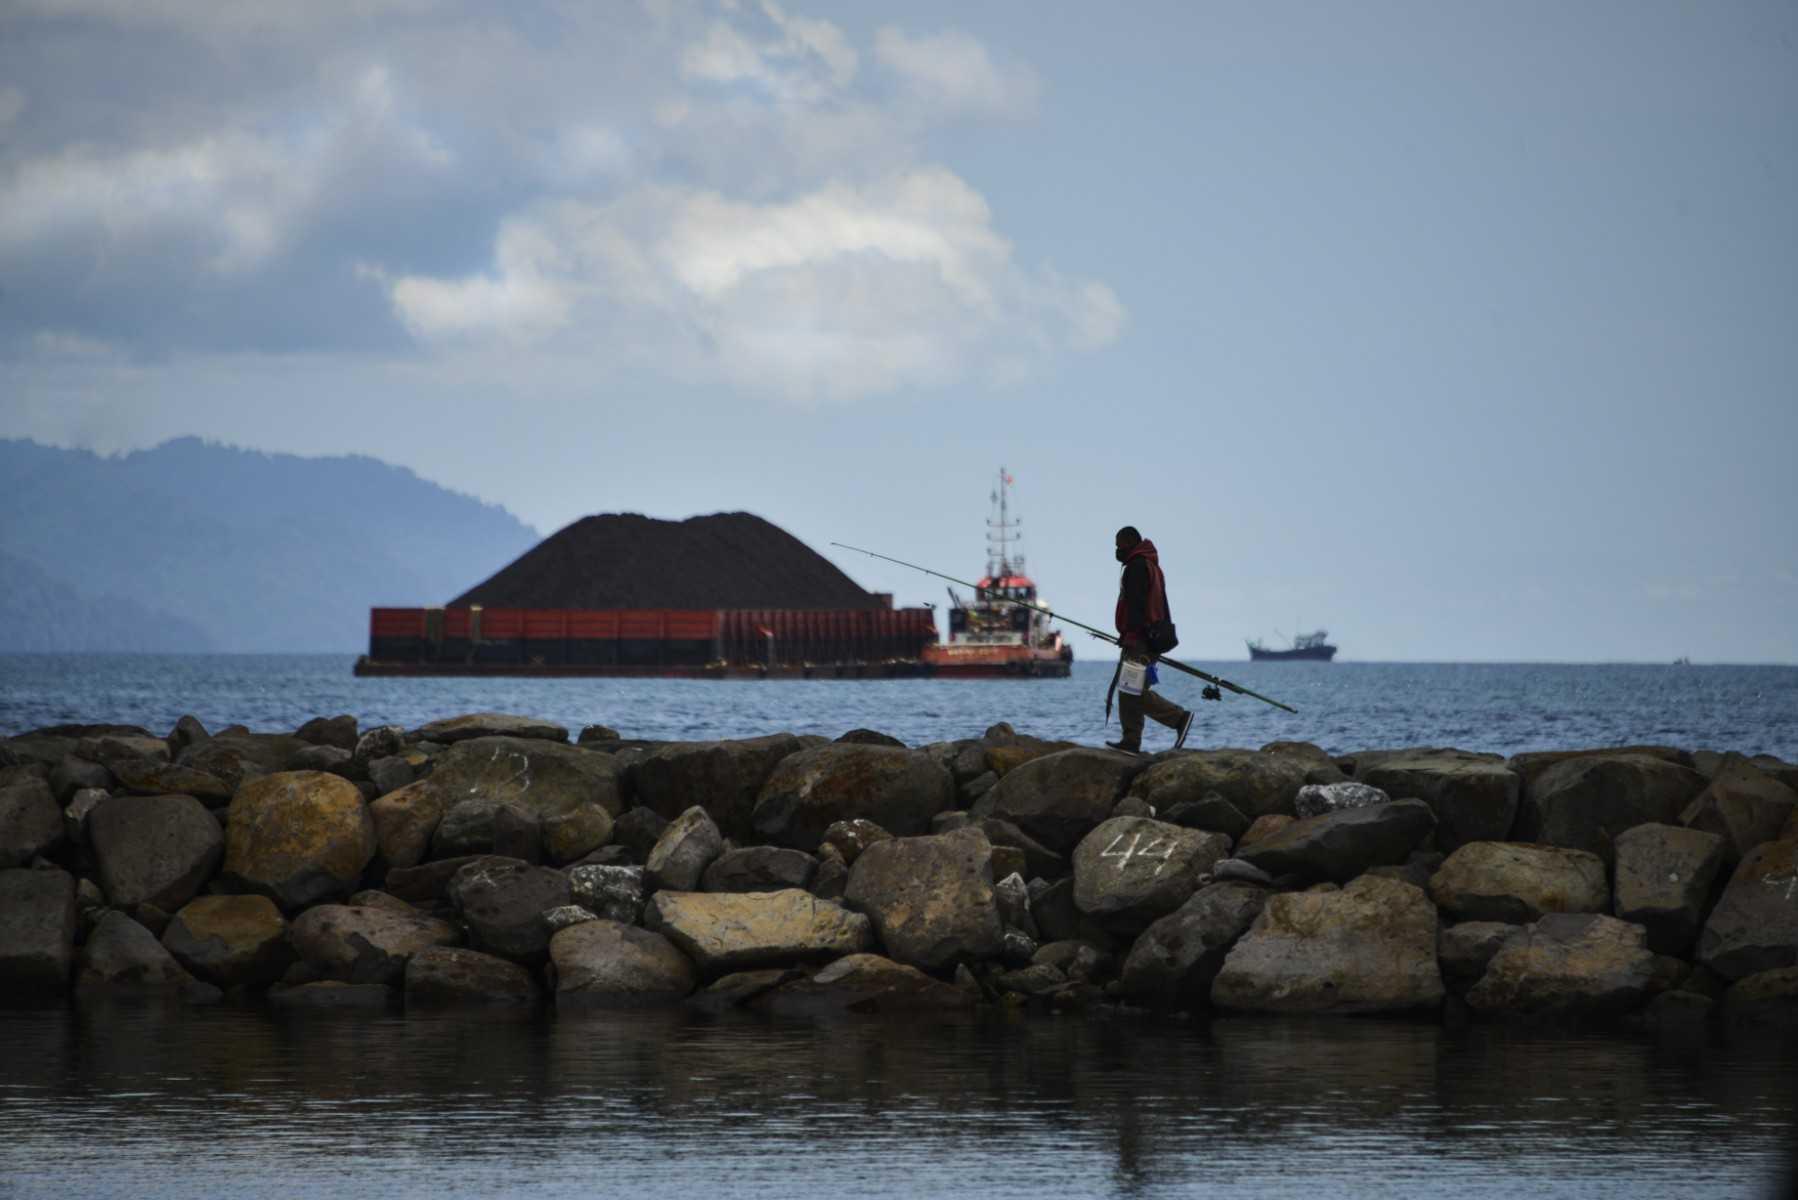 A man leaves after fishing as a tugboat pulling a barge filled with coal is seen along the coast of Banda Aceh on April 26, 2020. Photo: AFP